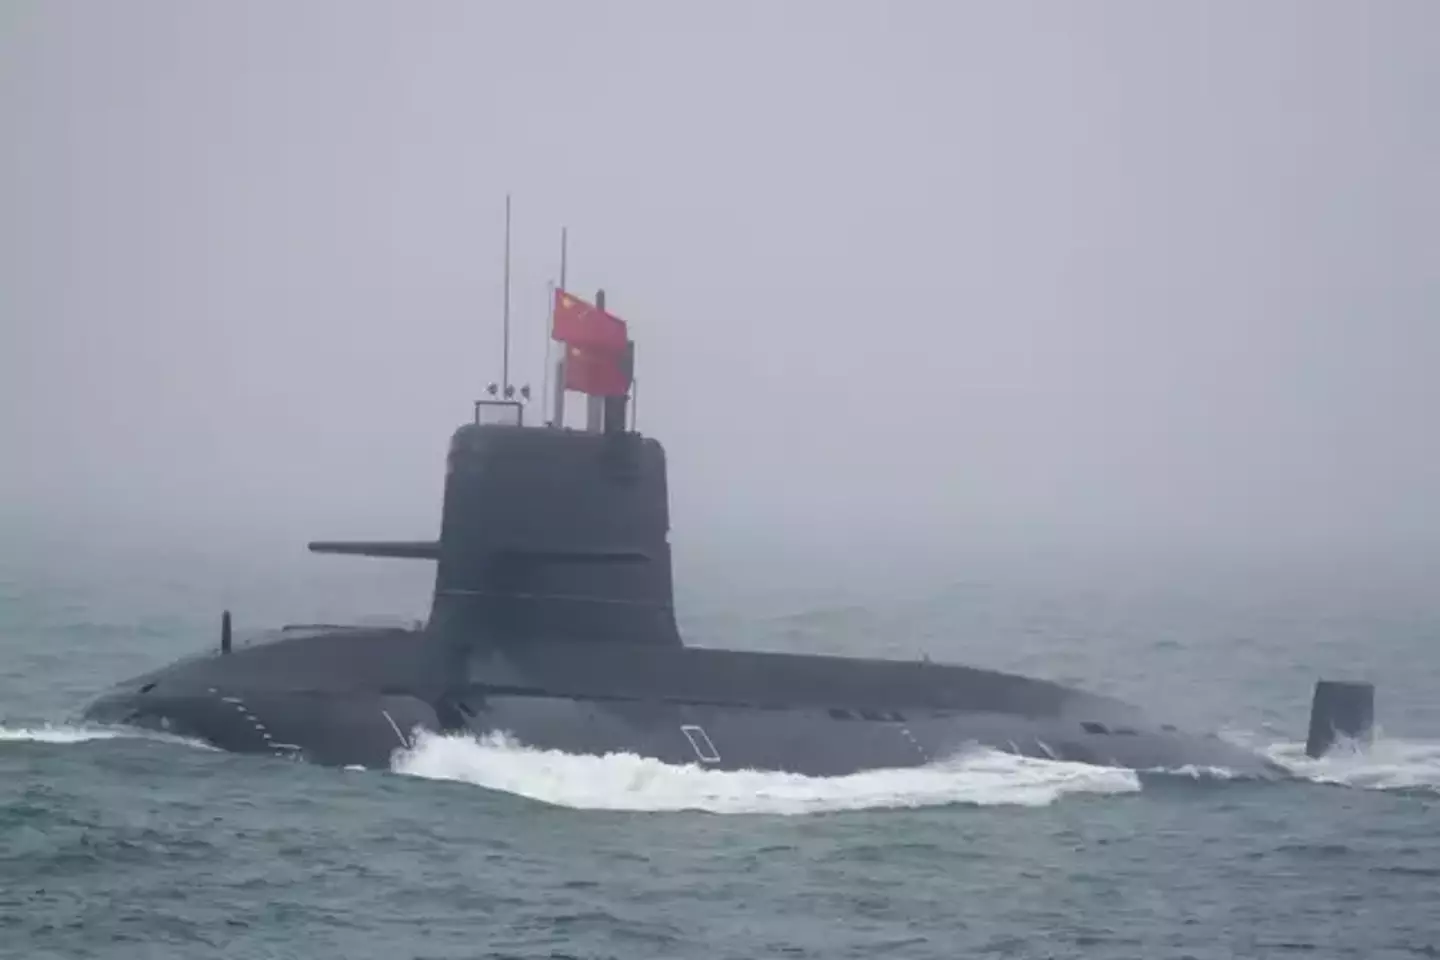 A leaked intelligence report claims the Chinese sub hit one of their own traps.